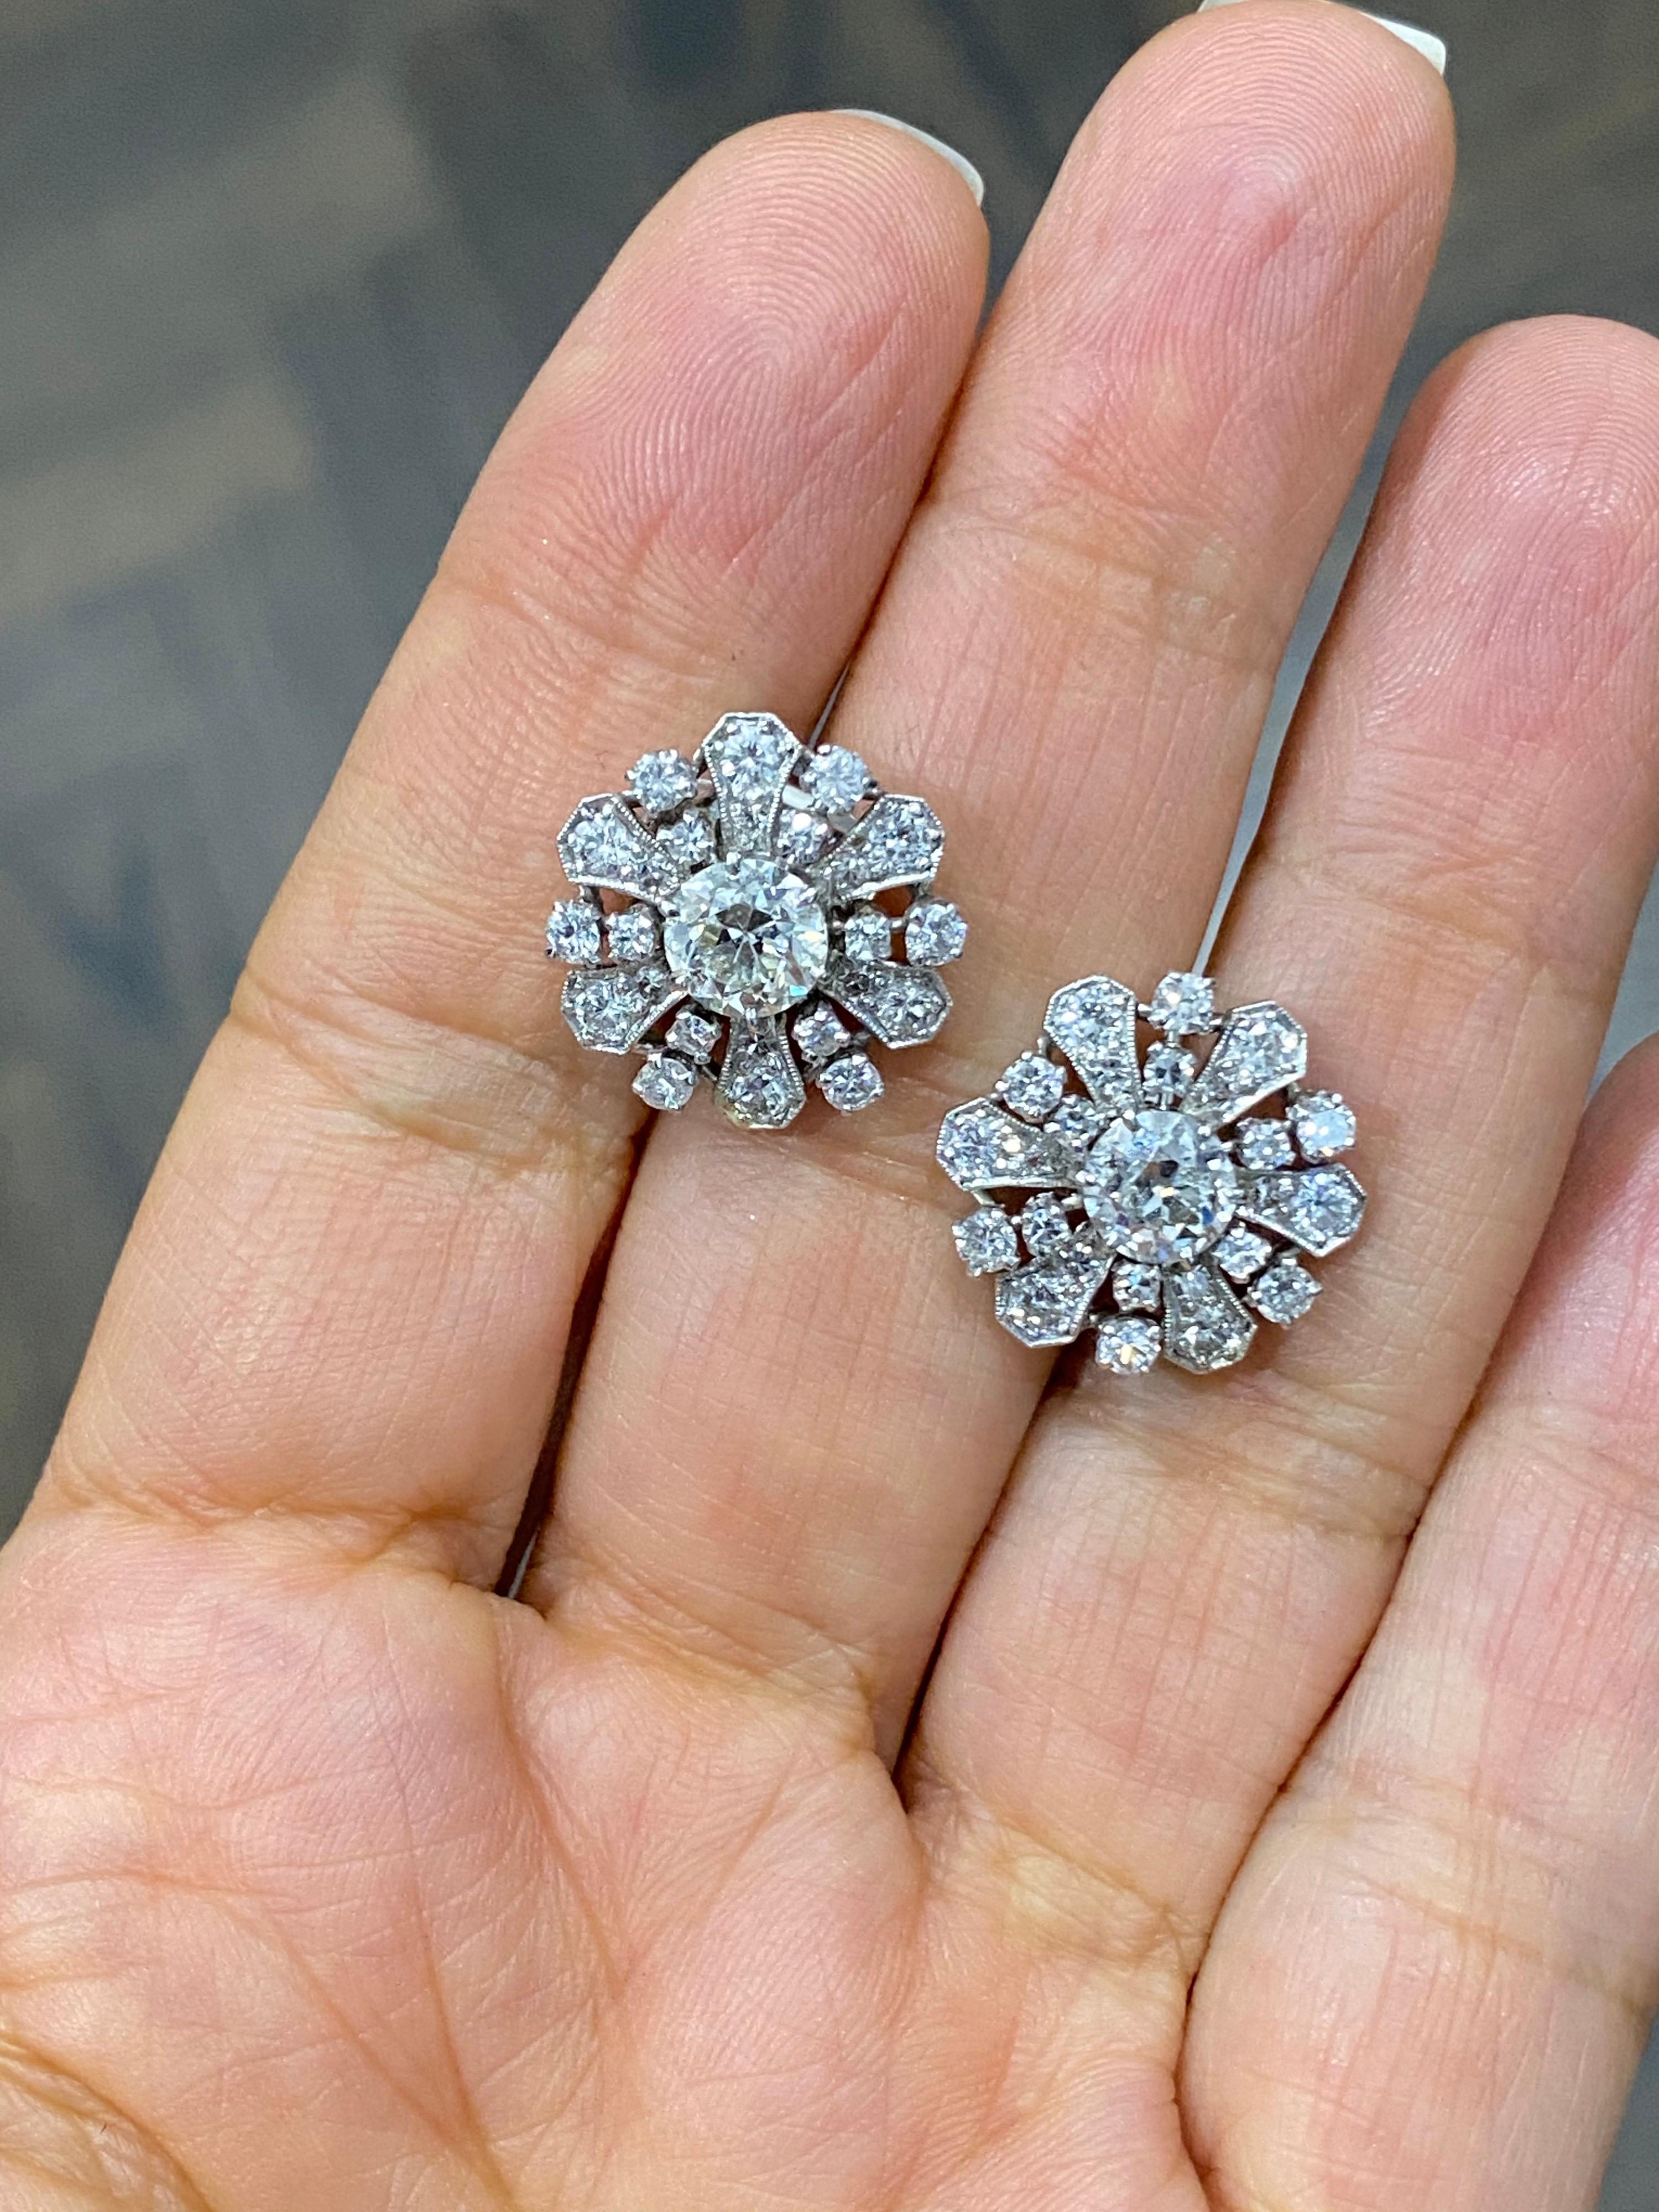 Divine Platinum large cluster vintage studs. 2 Center old European diamonds= approx. 1.75 Carats. ( H, SI2) With additional 24 round brilliant and 24 single cut rounds surrounding= approx. 1.25 carats. (G-H, VS-SI)
Approx. 3 carat total. 
5/8 inch